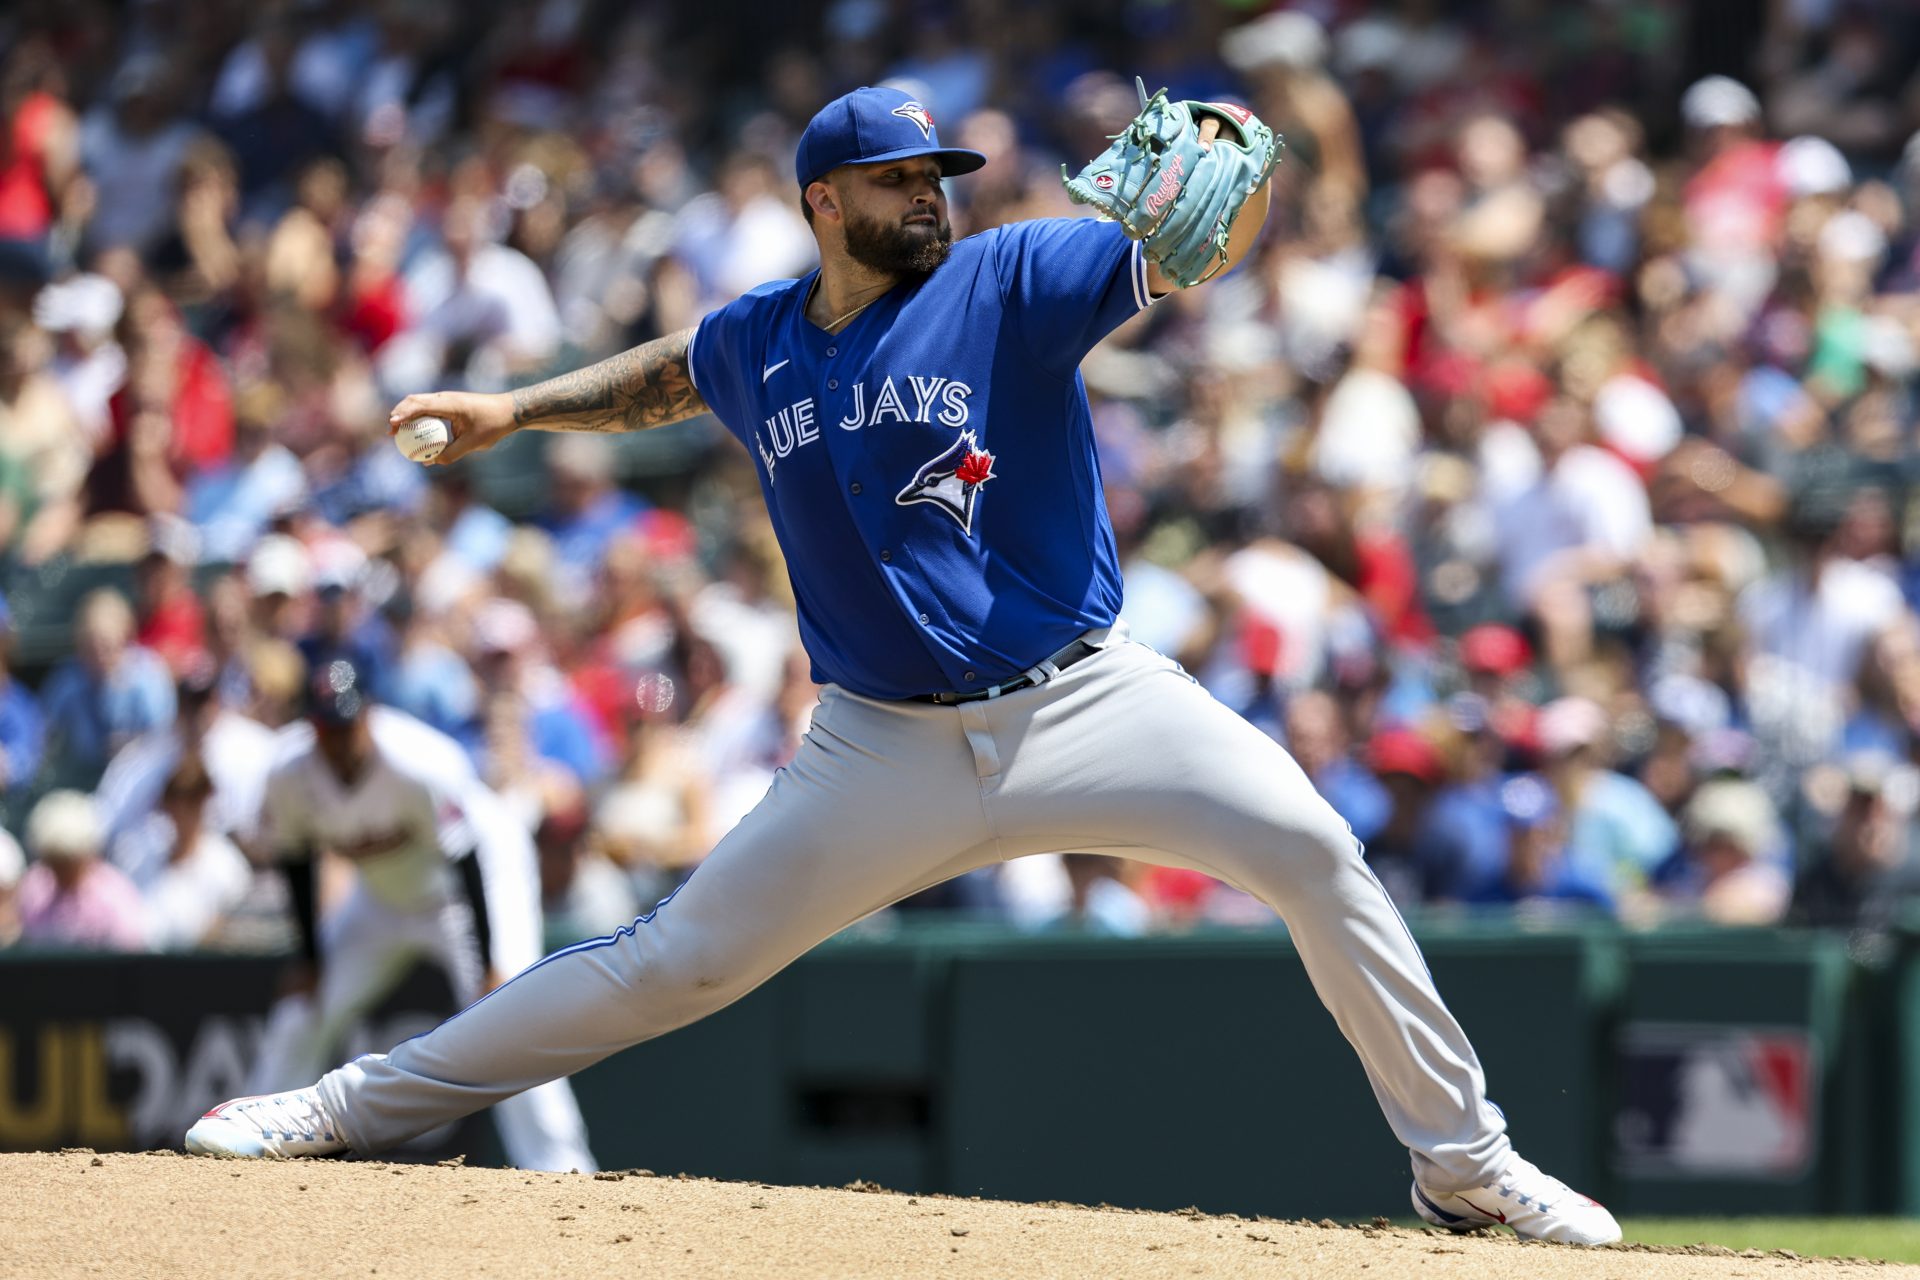 Toronto Blue Jays: Determine who the real Manoah is